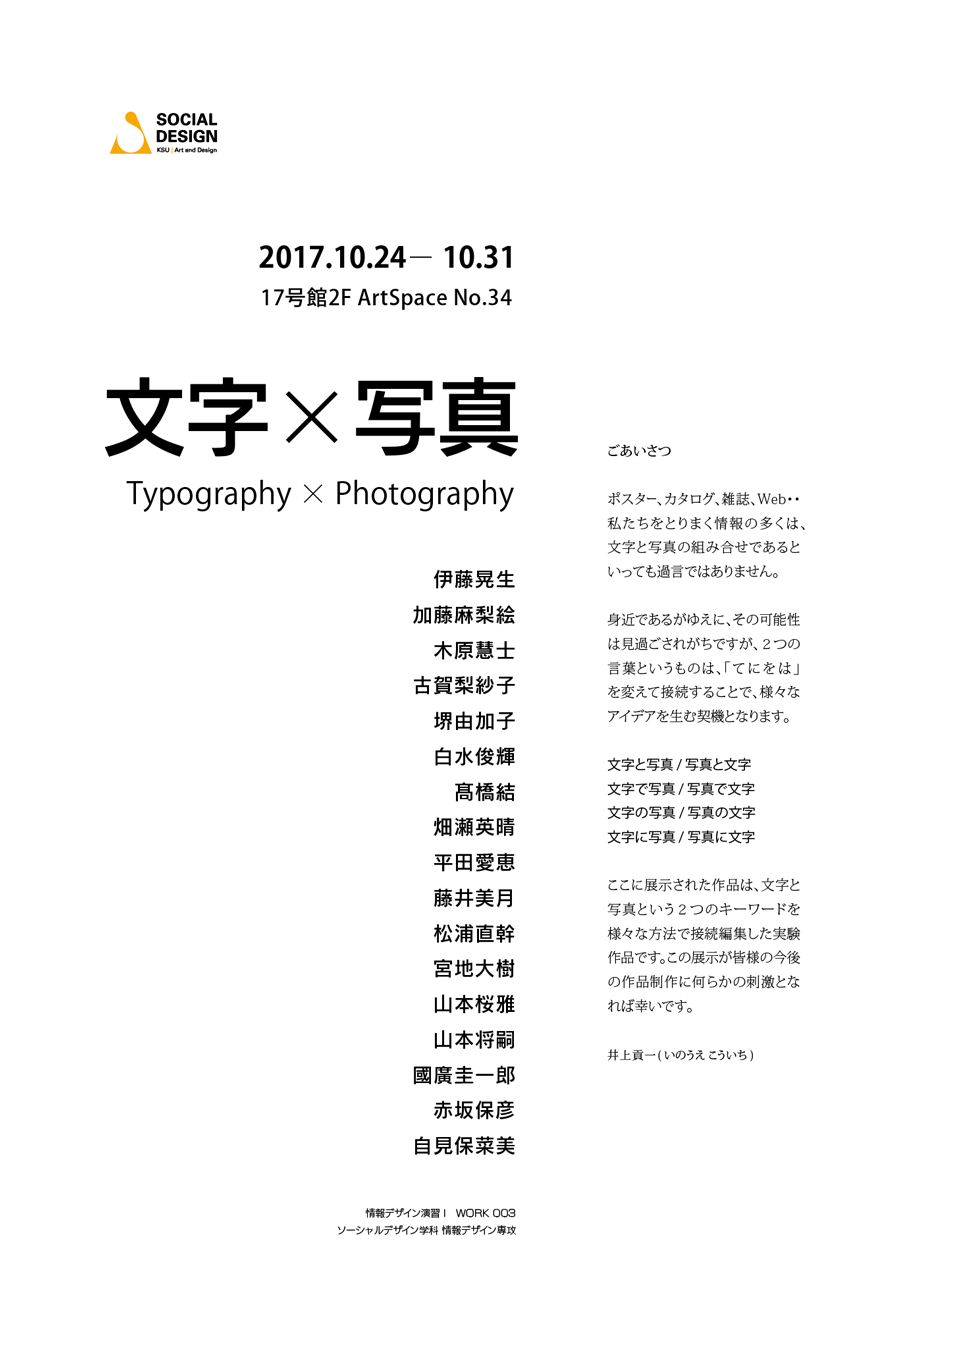 exhibition20171024.png